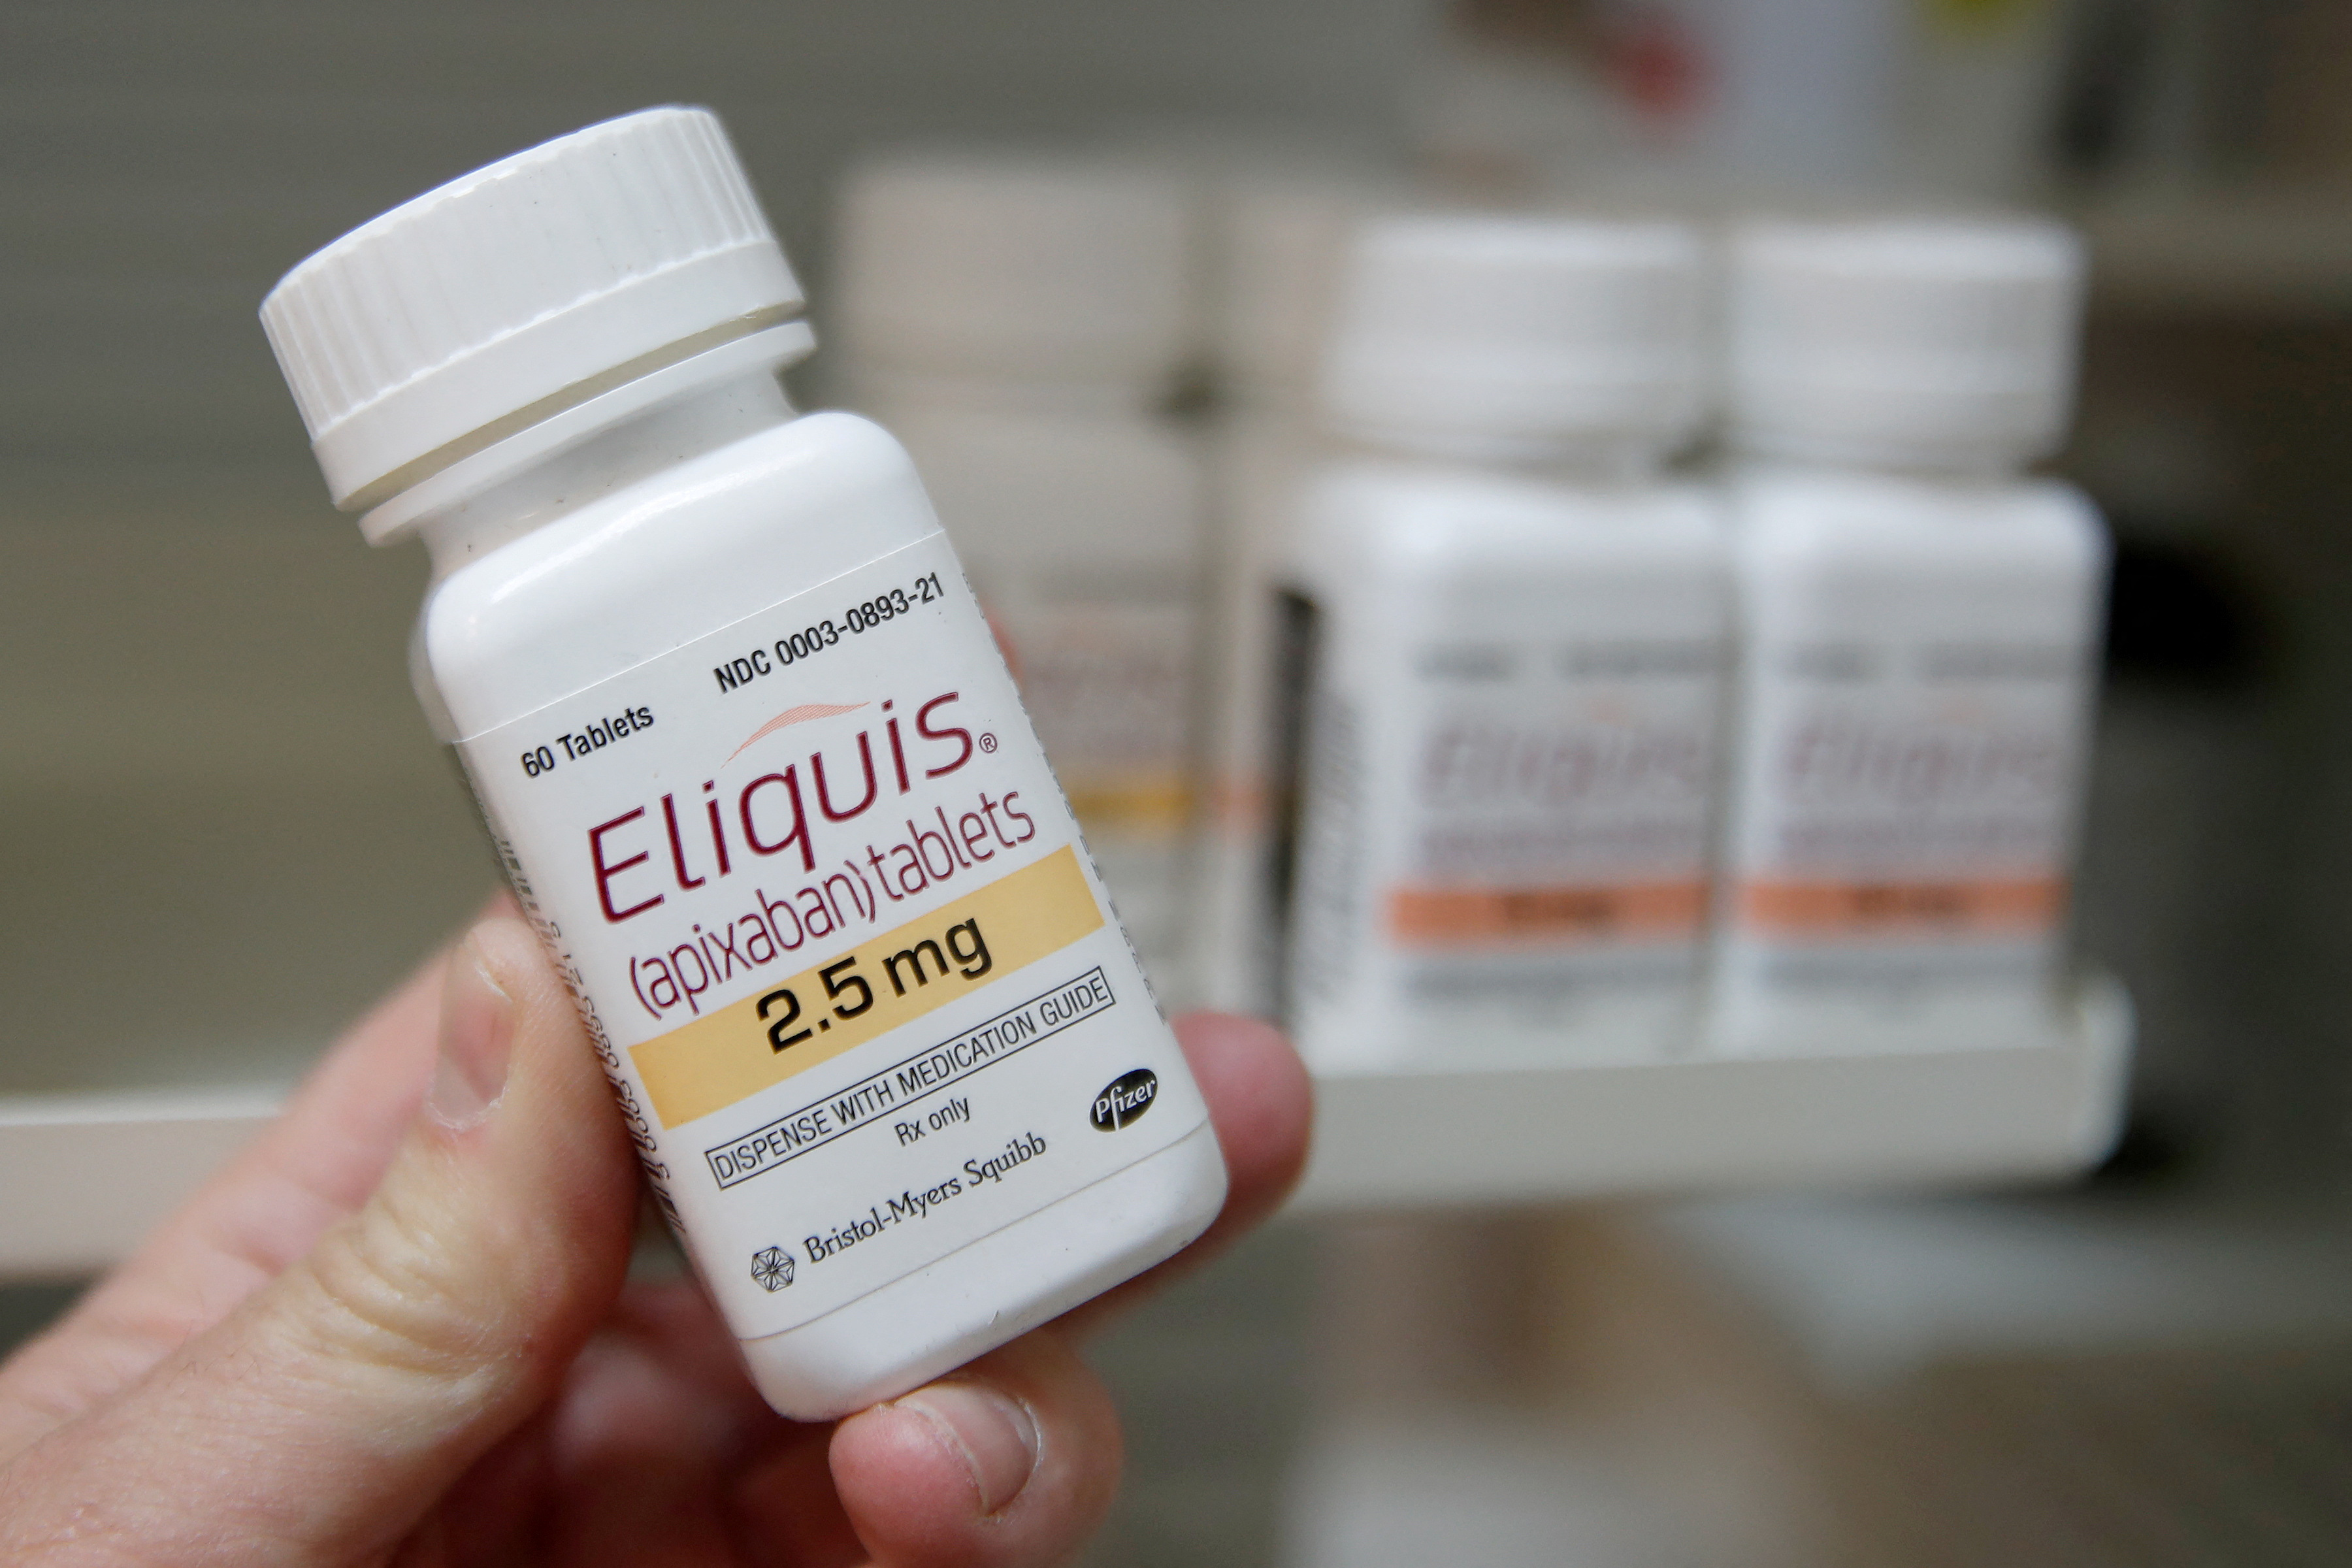 A pharmacist holds a bottle of the drug Eliquis, made by Pfizer and Bristol Myers Squibb , at a pharmacy in Provo